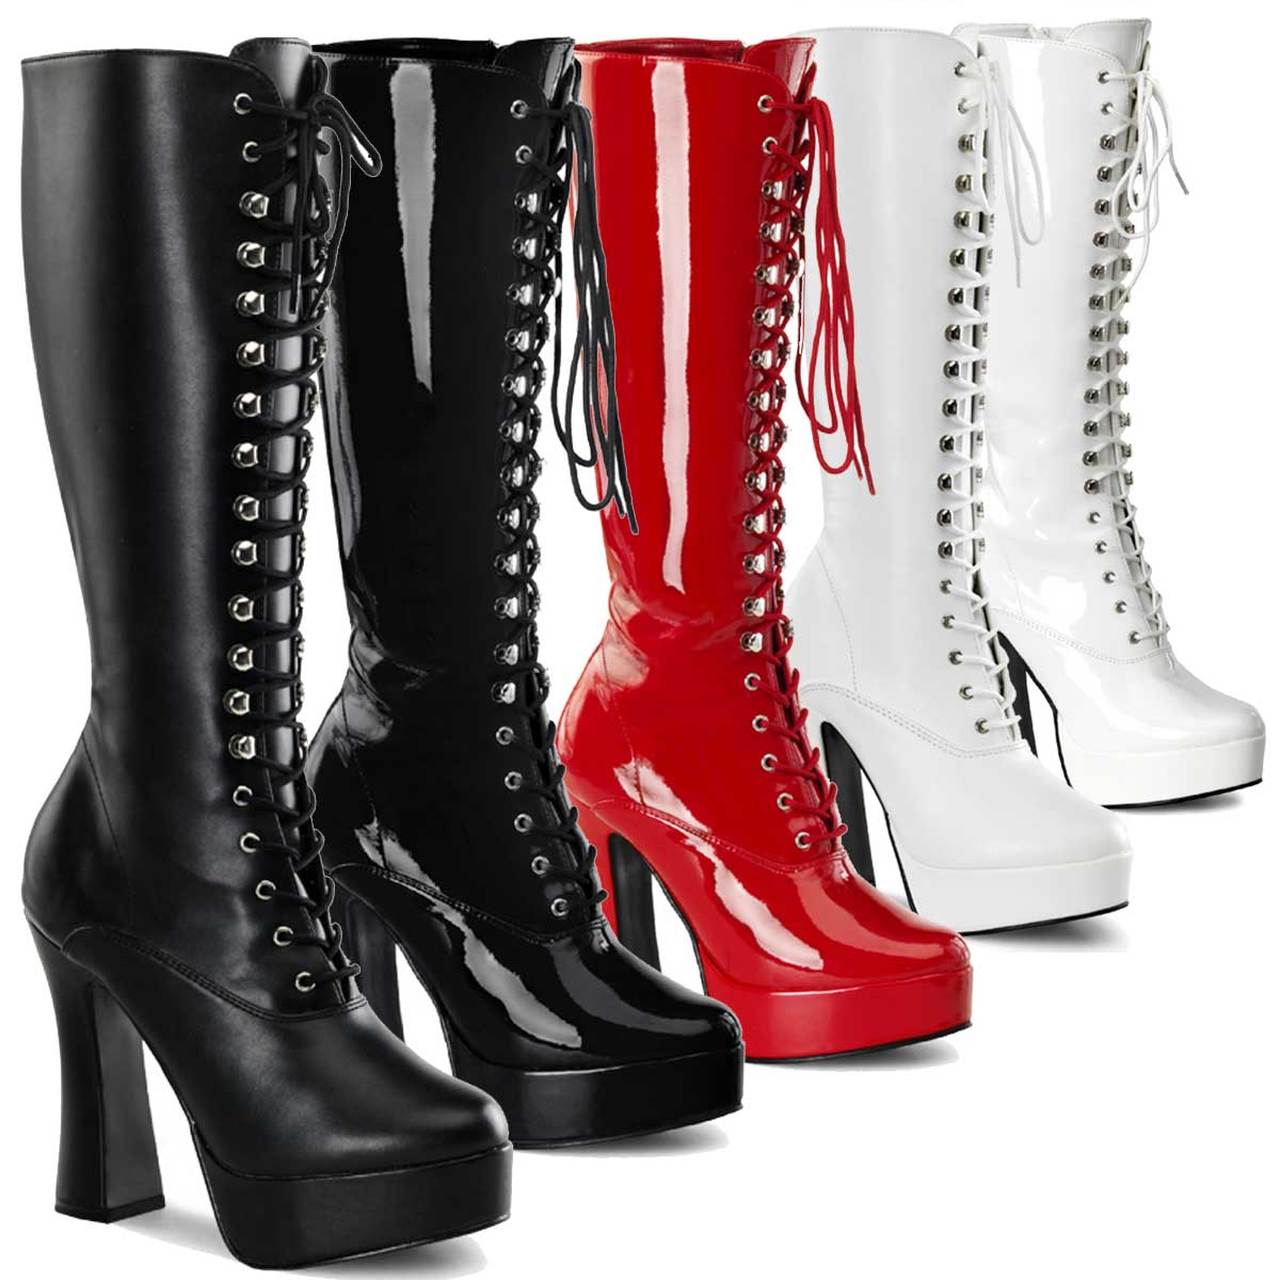 5" Electra Lace Up Knee Boot in all available colors and finishes.